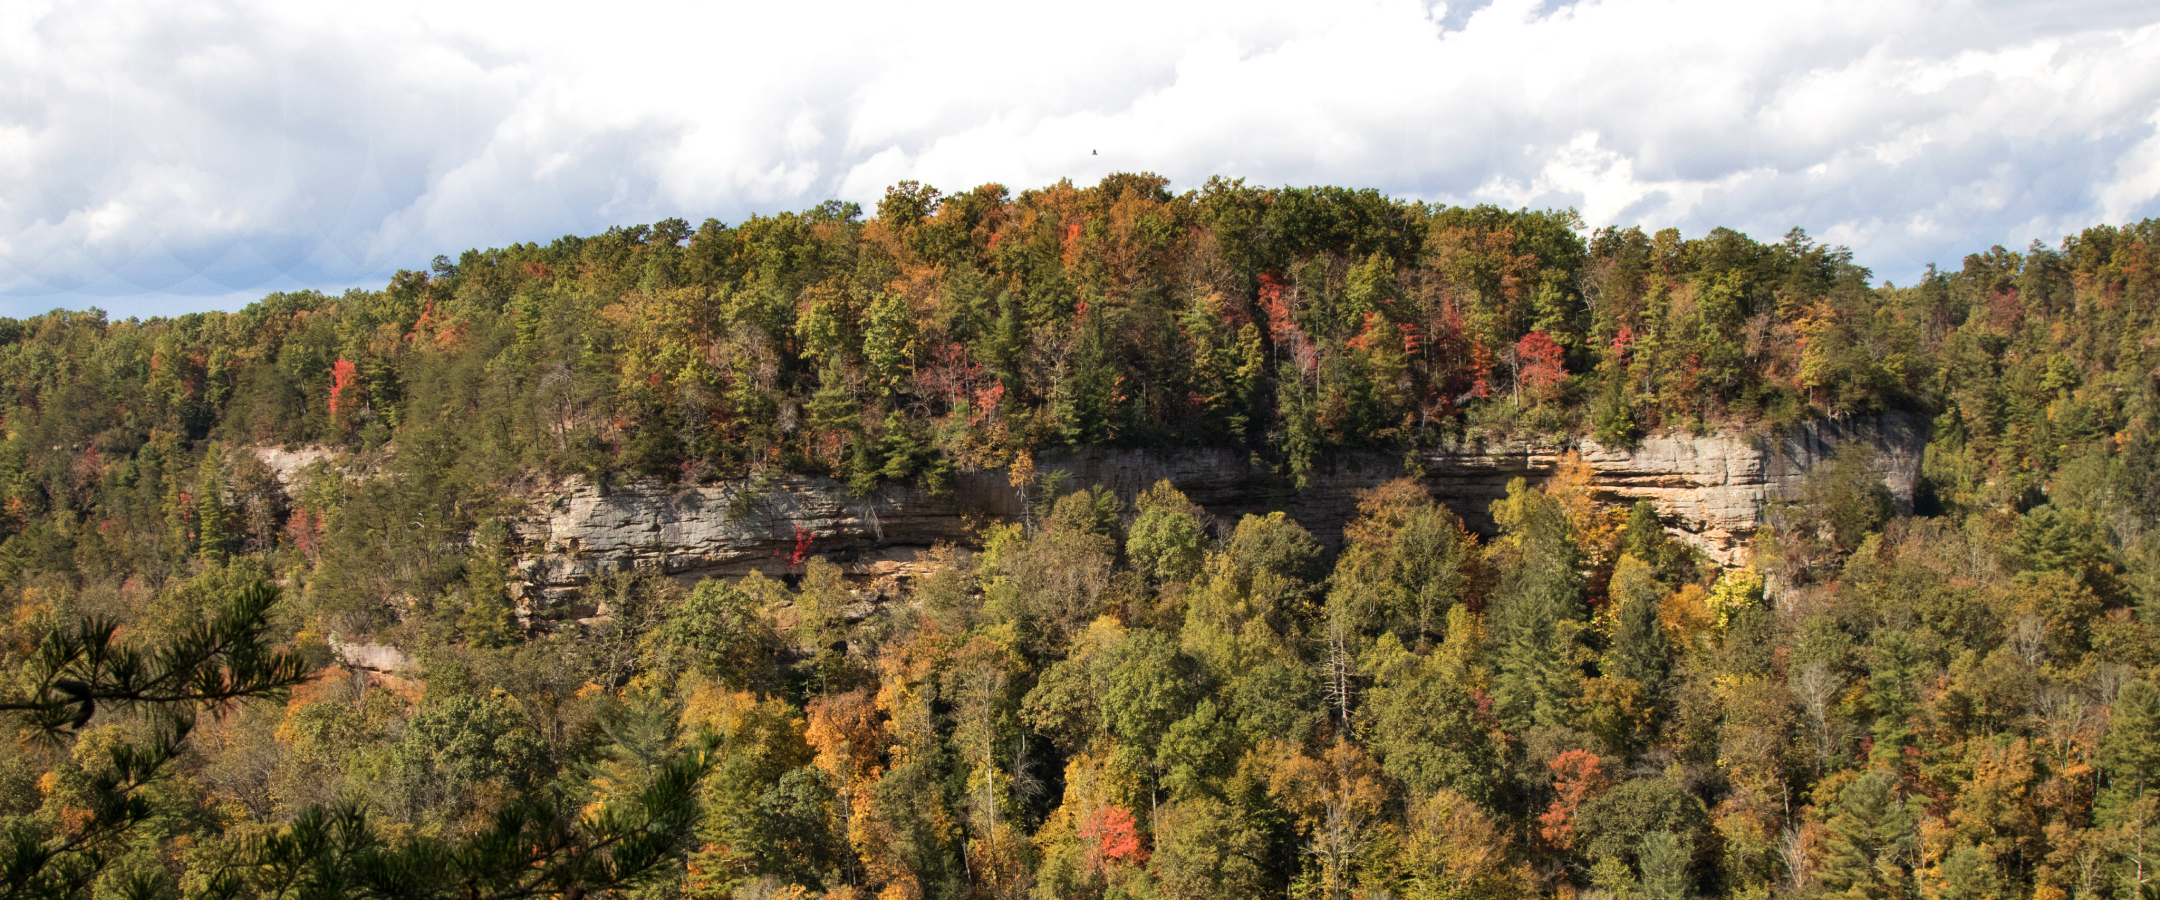 Fall Colored Leaves on Trees on Mountainside 